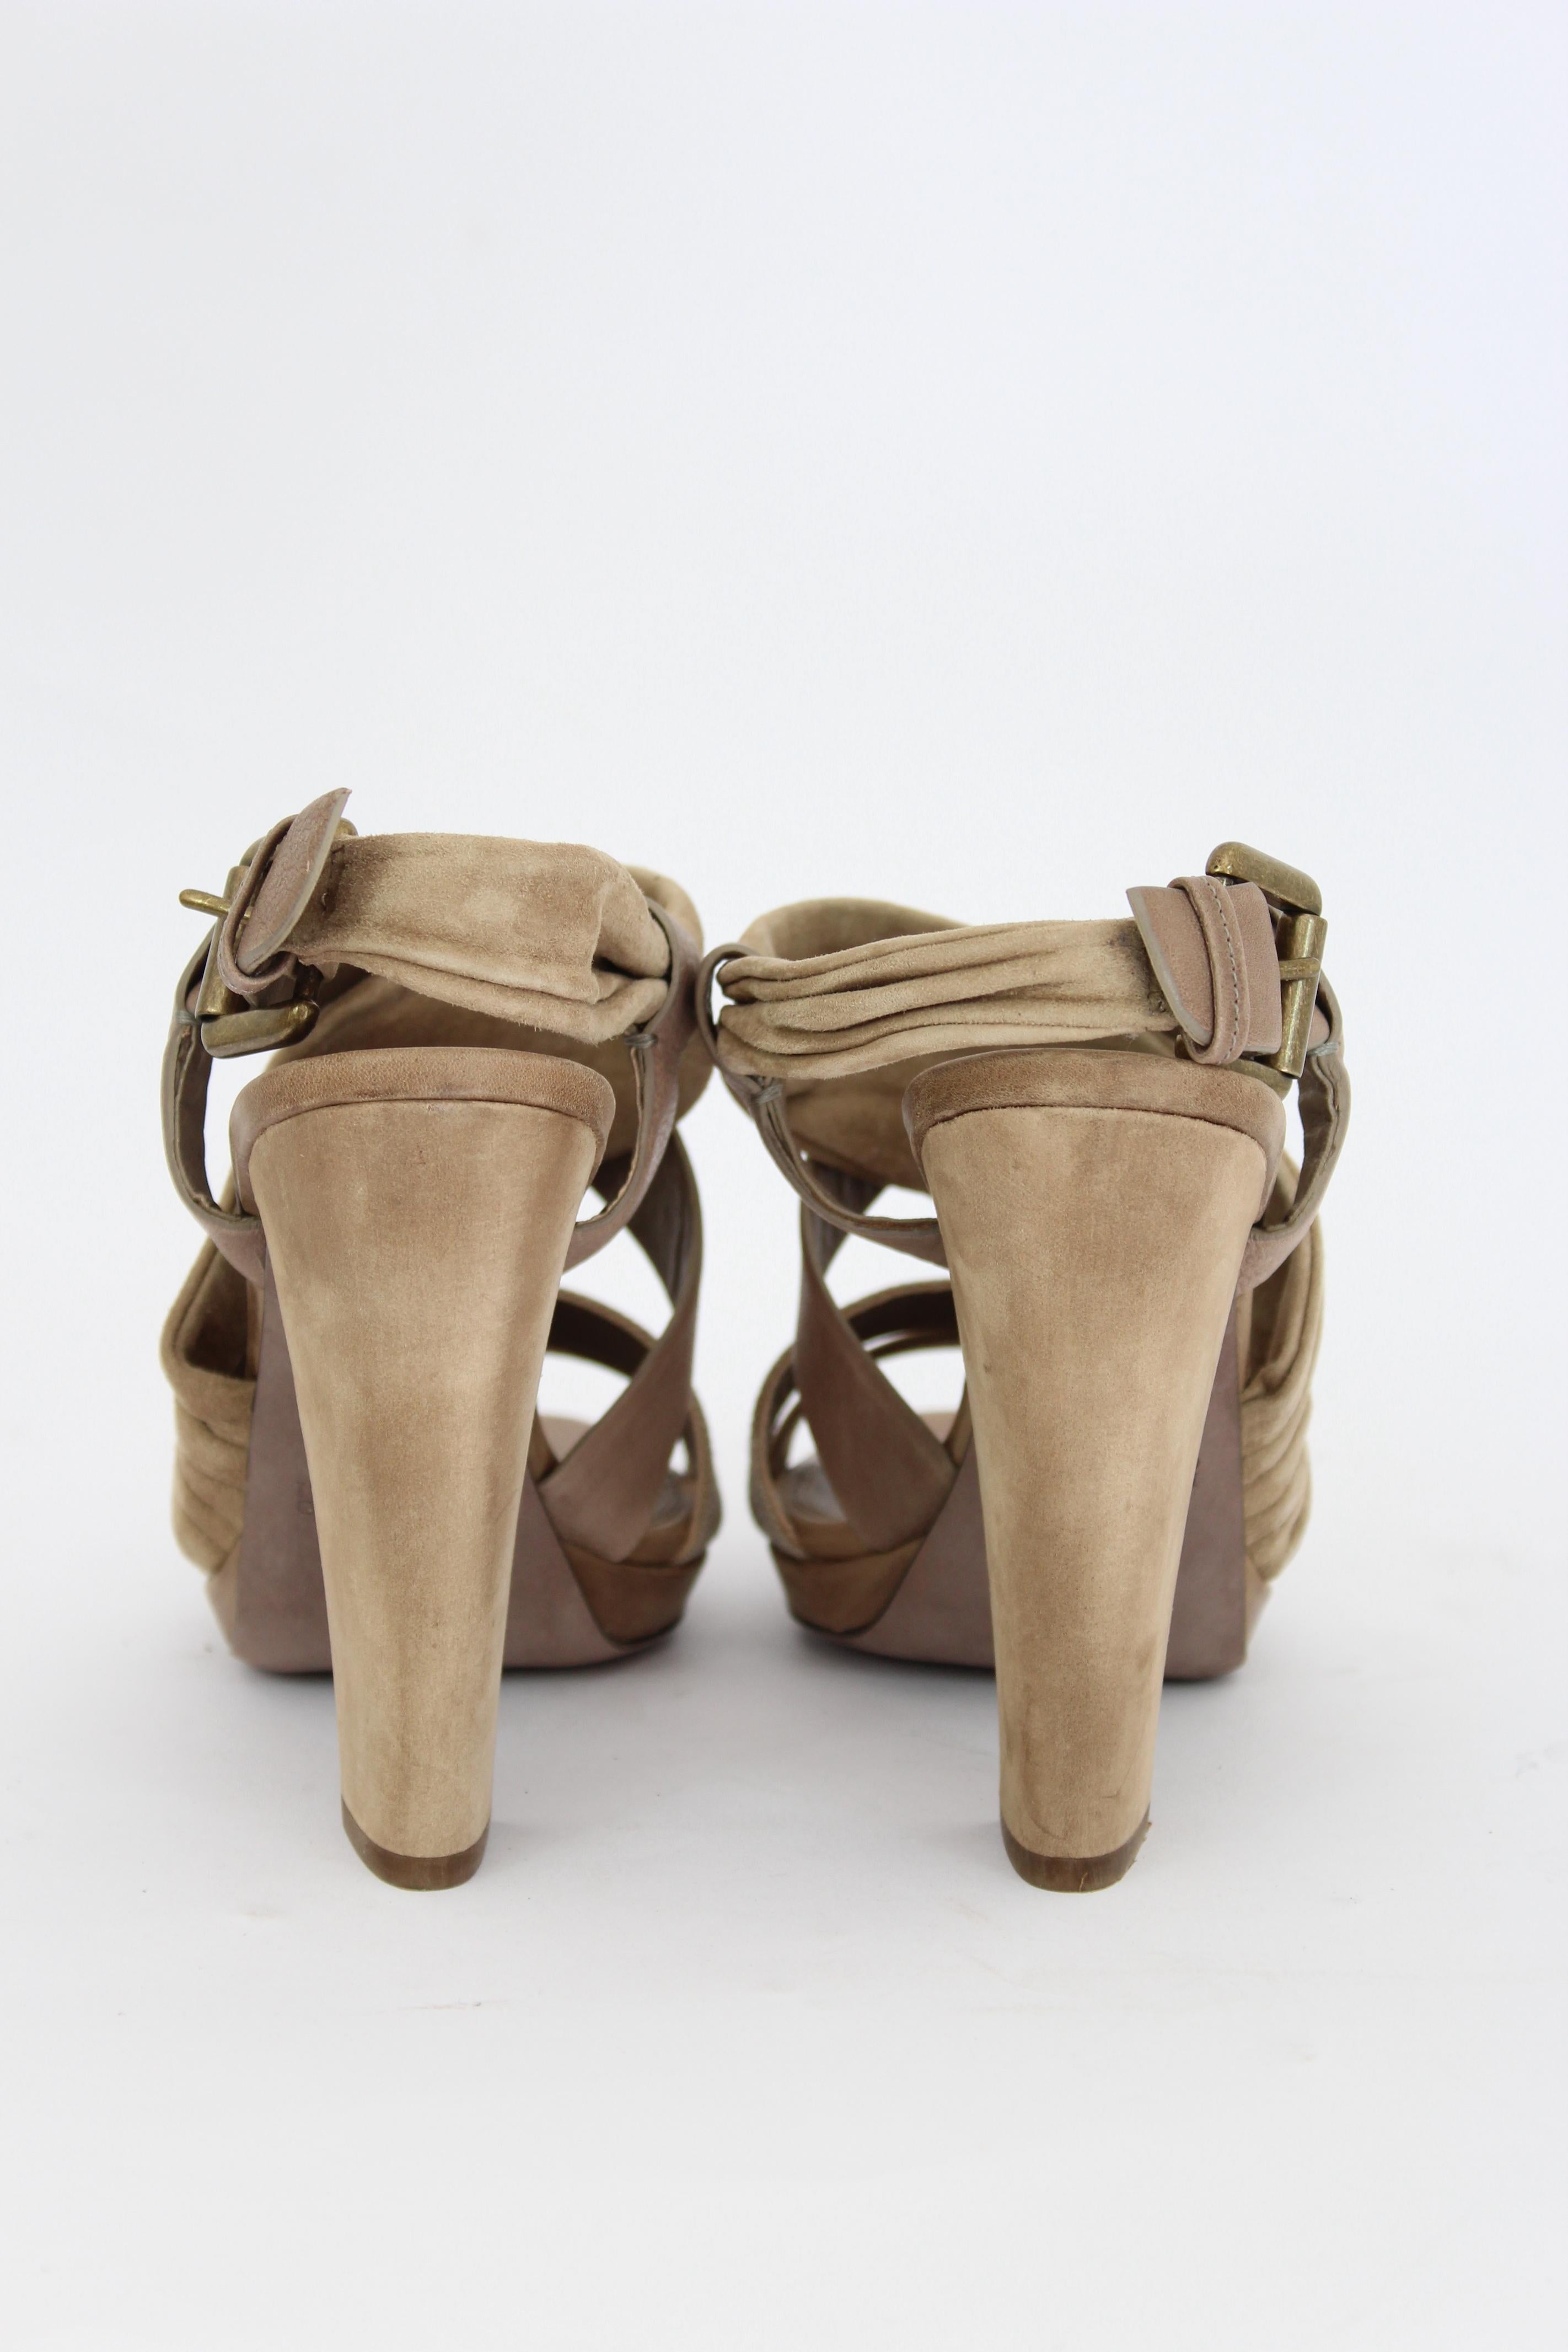 Brunello Cucinelli Beige Suede Leather Sandals Heels Shoes In Excellent Condition For Sale In Brindisi, Bt